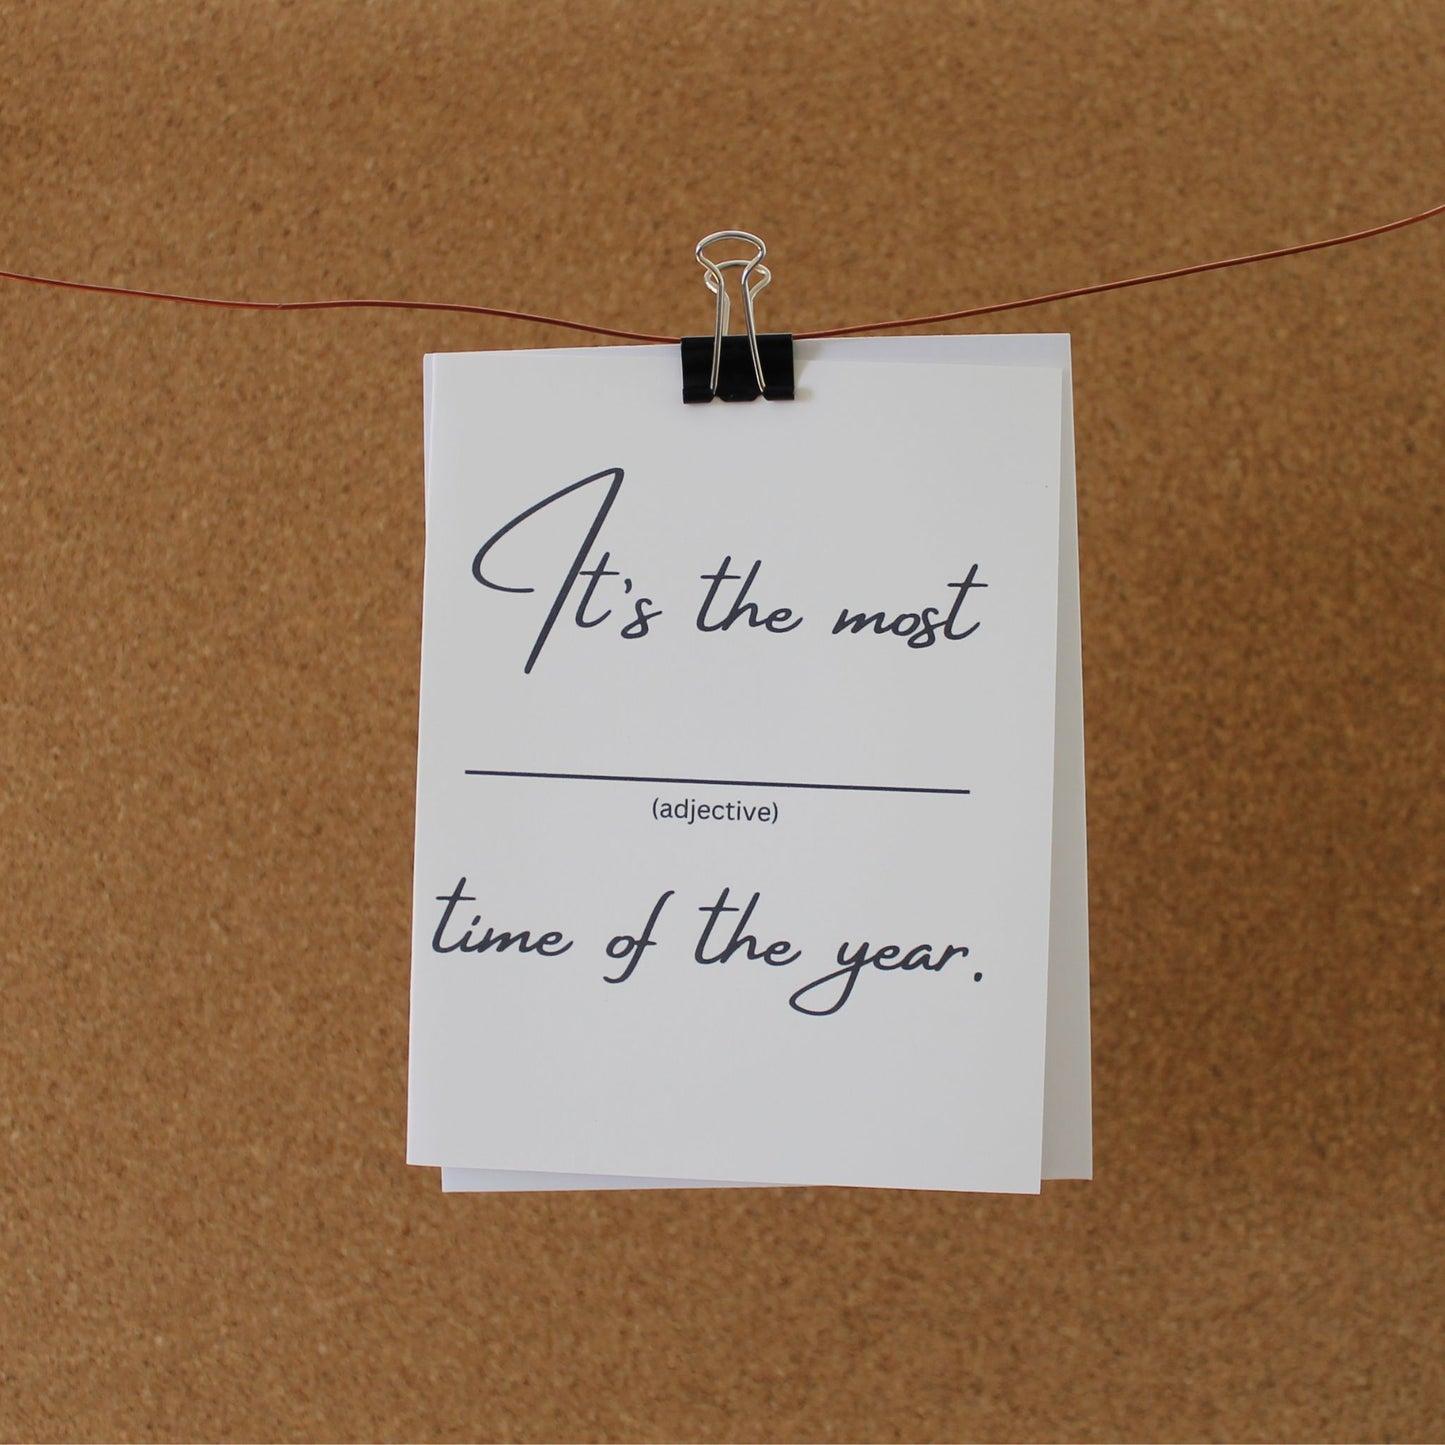 Funny Holiday Card: "It's the most ____ time of the year."